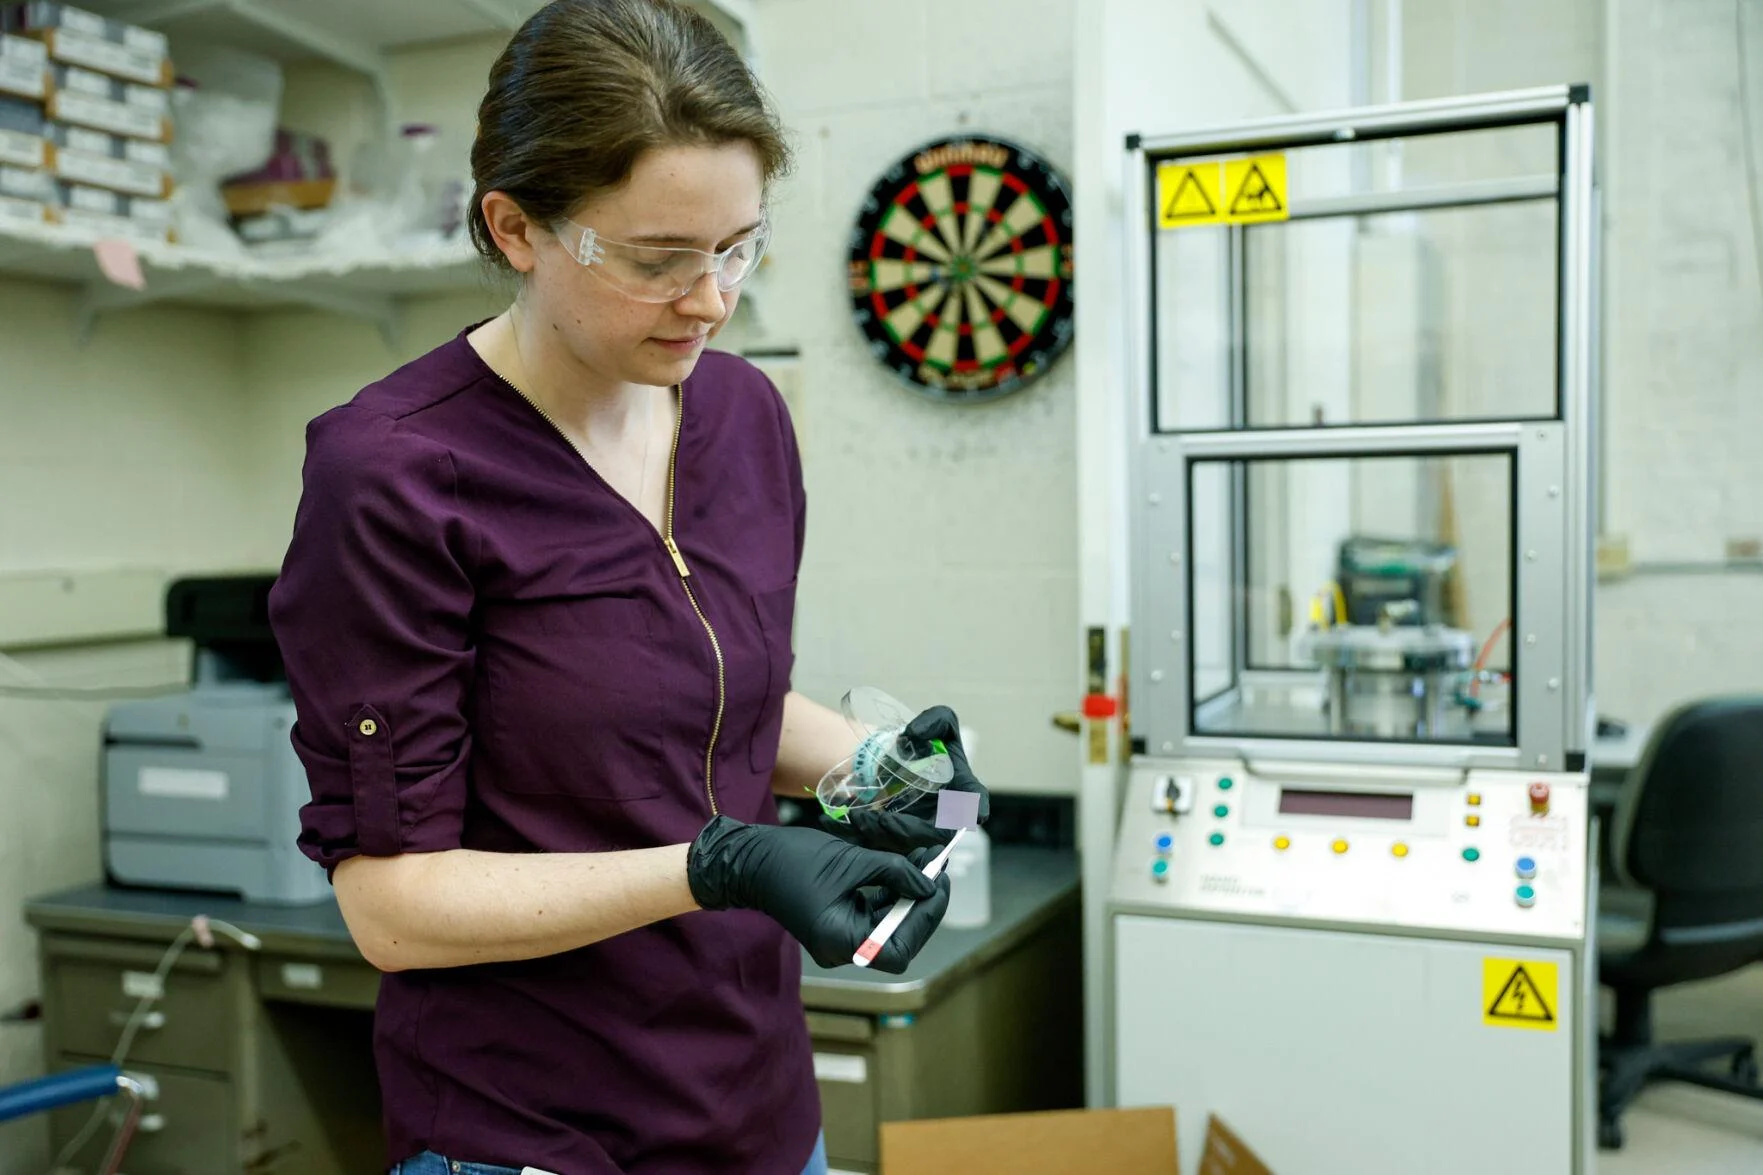 Katy Jinkins, CEO and cofounder of SixLine Semiconductor, shows a silicon piece that holds millions of carbon nanotubes. The darker purple area is where the nanotubes are concentrated. ASHLEY RODRIGUEZ